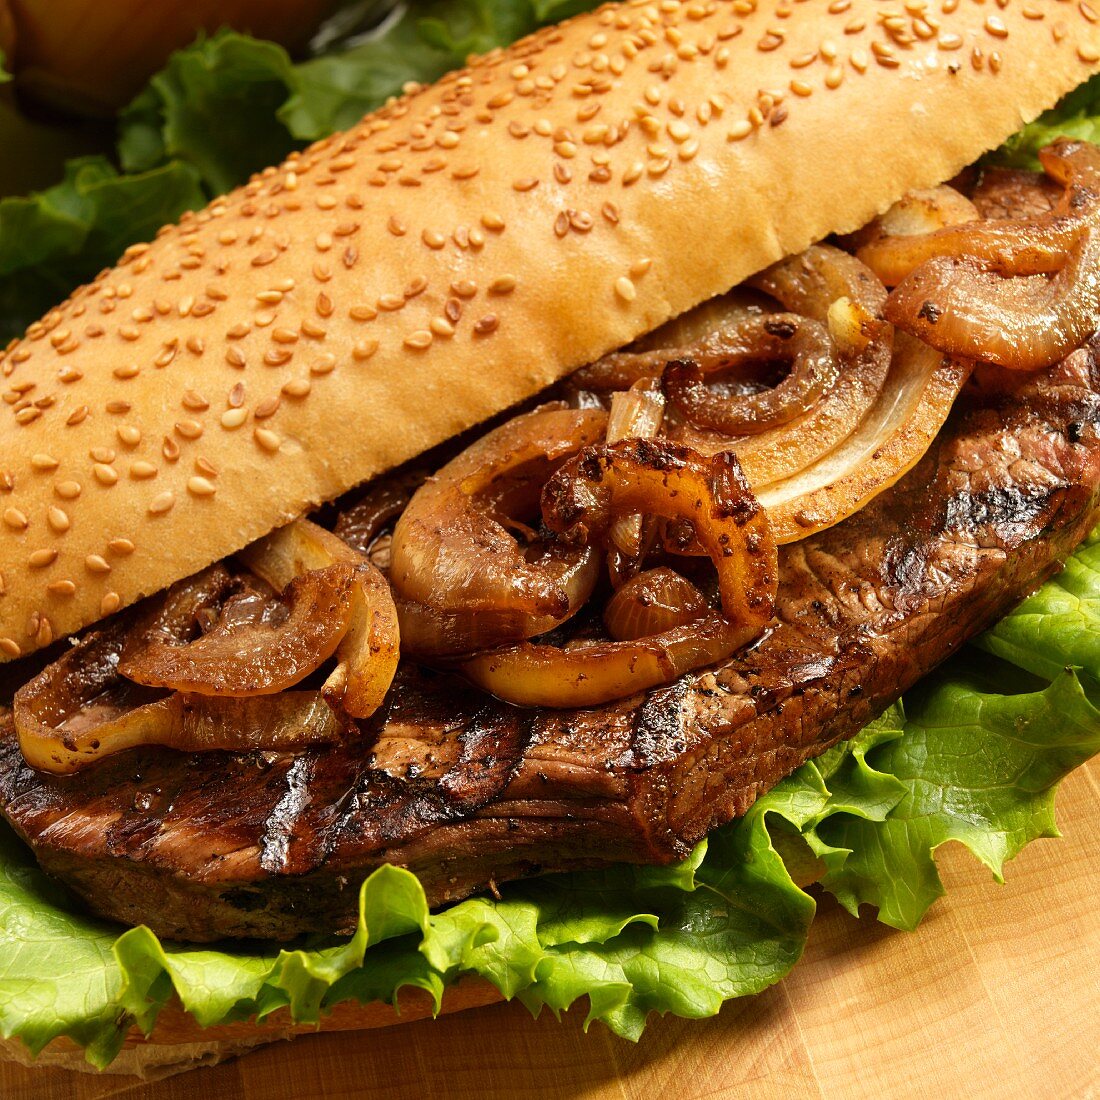 Grilled Steak and Onion Sandwich with Lettuce on a Roll